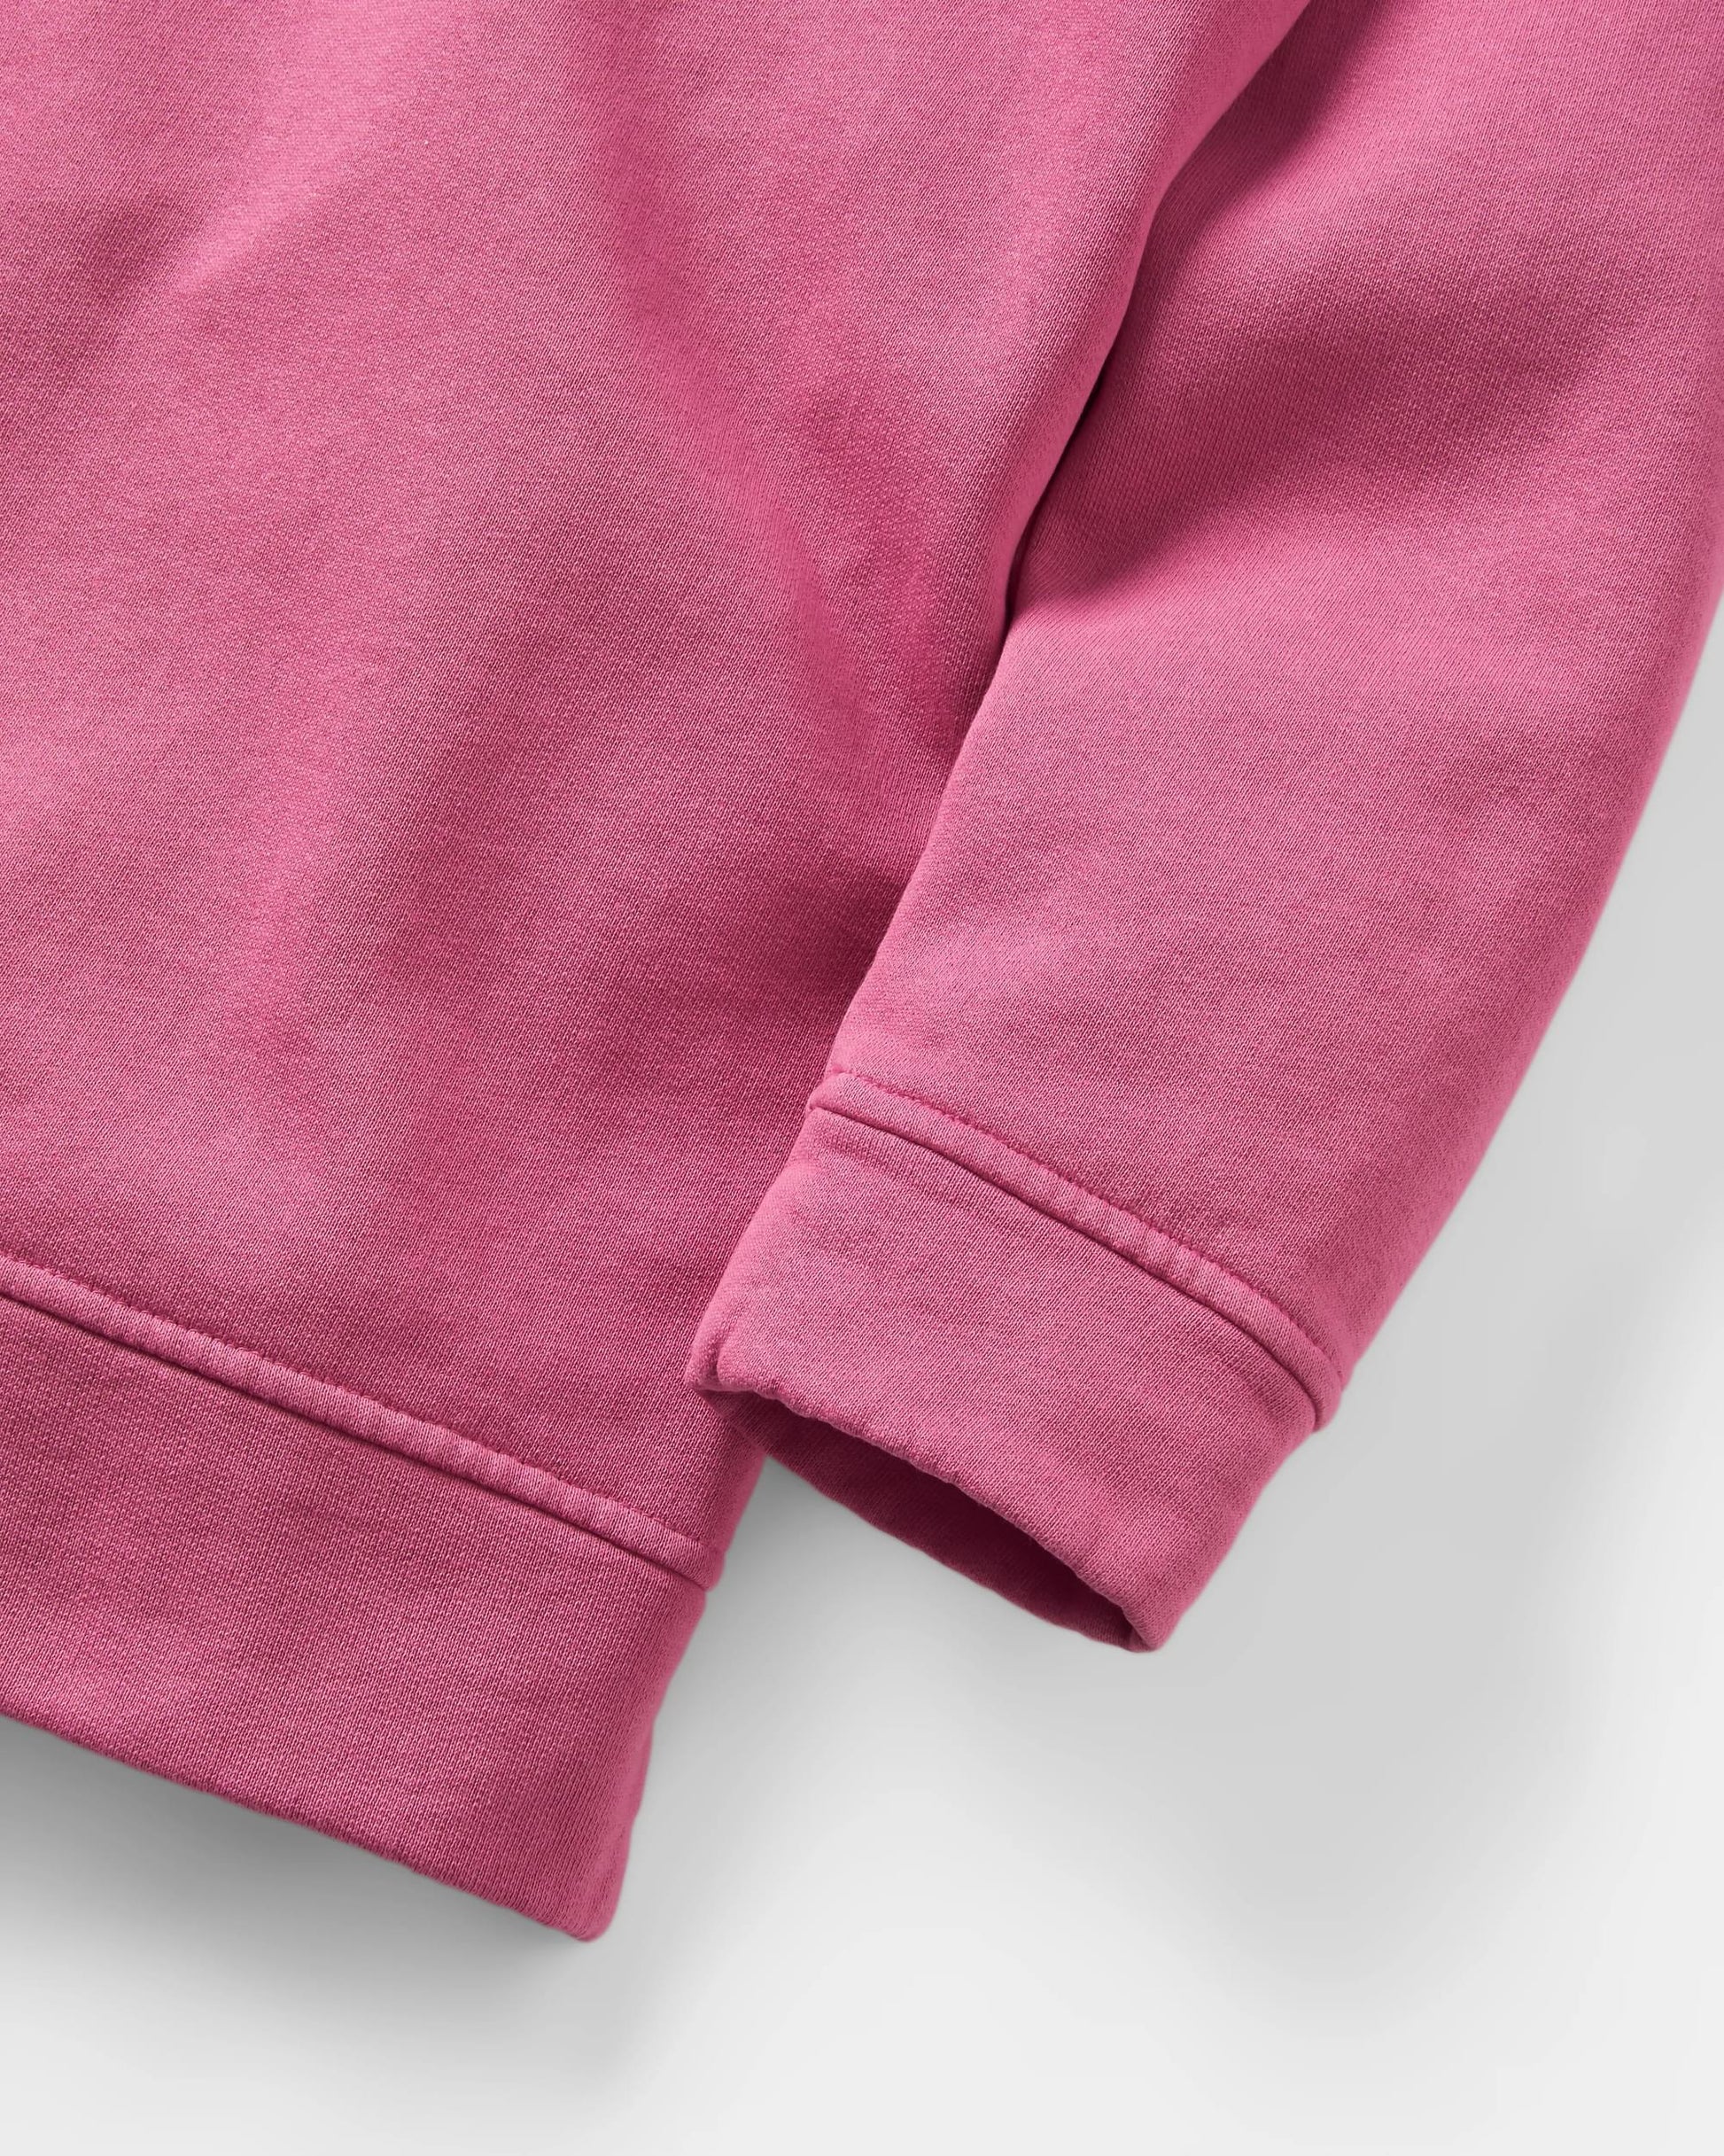 Outlook Recycled Cotton Hoodie - Mauve Haze